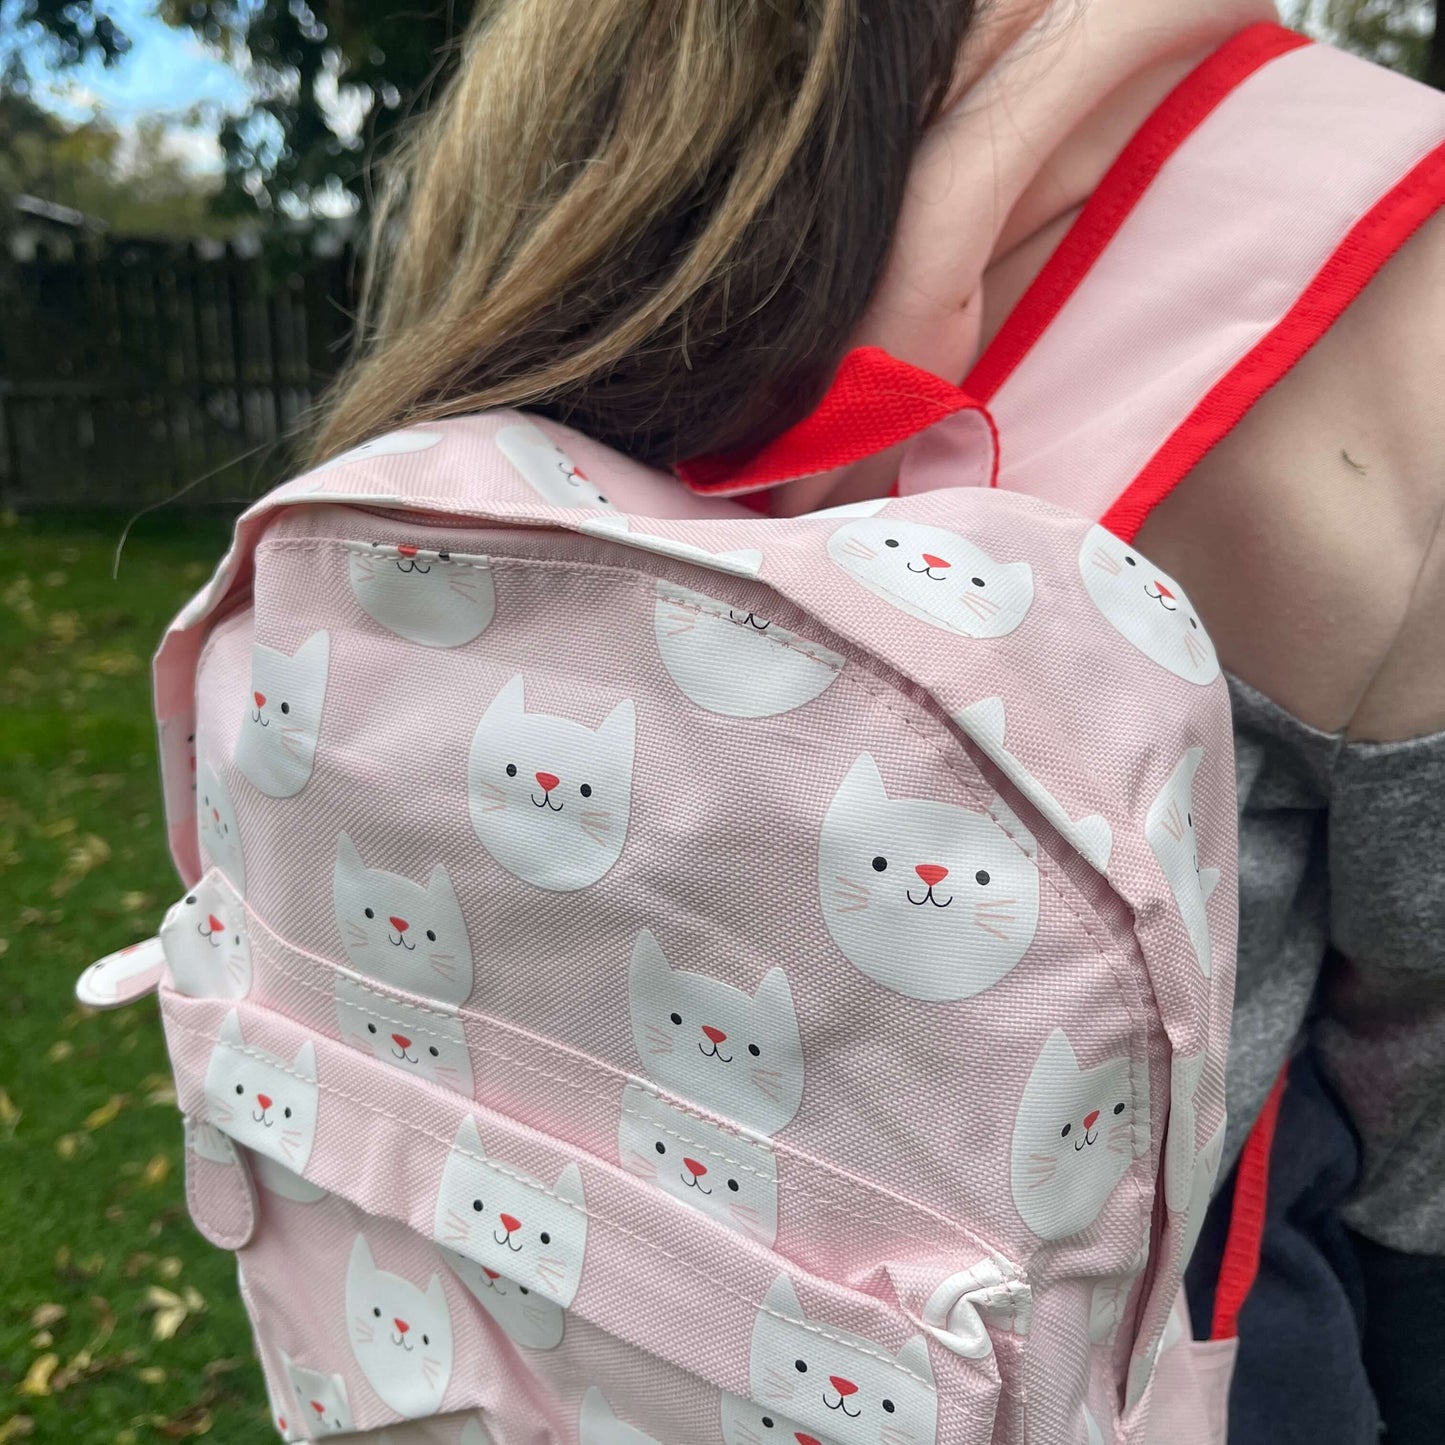 Girl wearing a pink backpack with white cat faces printed on it.